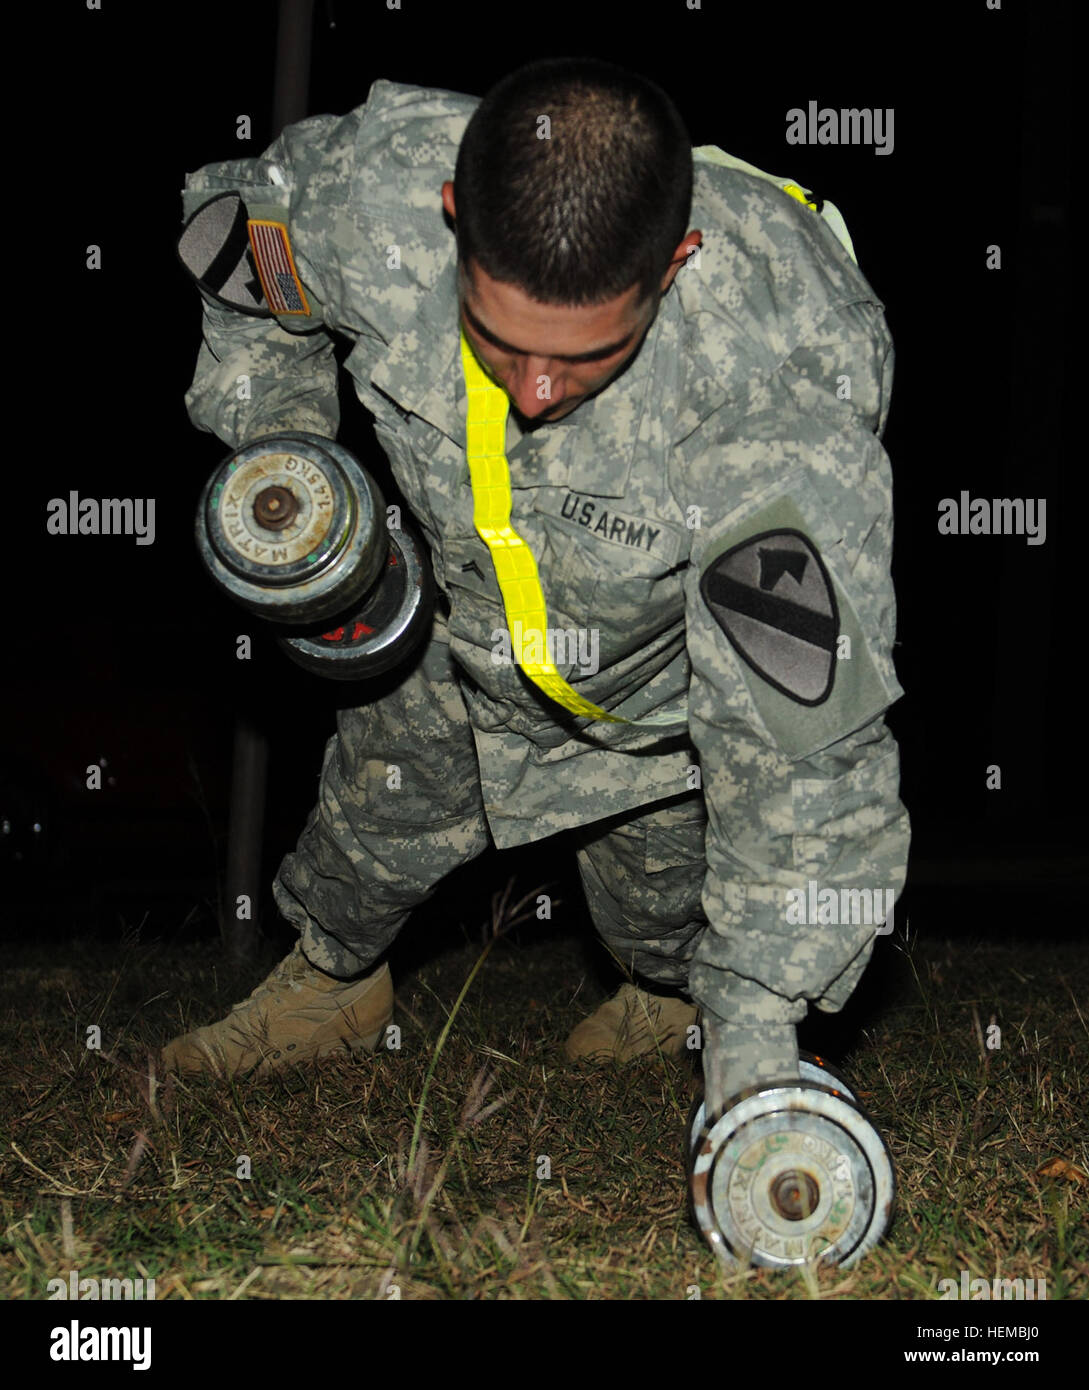 Cpl. Casey Hill, a cavalry scout with Troop B., 4-9 Cav. 'Dark Horse' 2nd BCT, 1st Cav. Div., performs a modified pushup utilizing dumbbells during the 3.2-mile, round robin Dark Horse Noncommissioned Officer Physical Fitness Challenge here, Nov. 2.   (Photo by Sgt. Quentin Johnson, 2BCT, 1st Cav Div PAO) Soldiers take part in battalion-wide PT challenge 121102-A-CJ112-621 Stock Photo